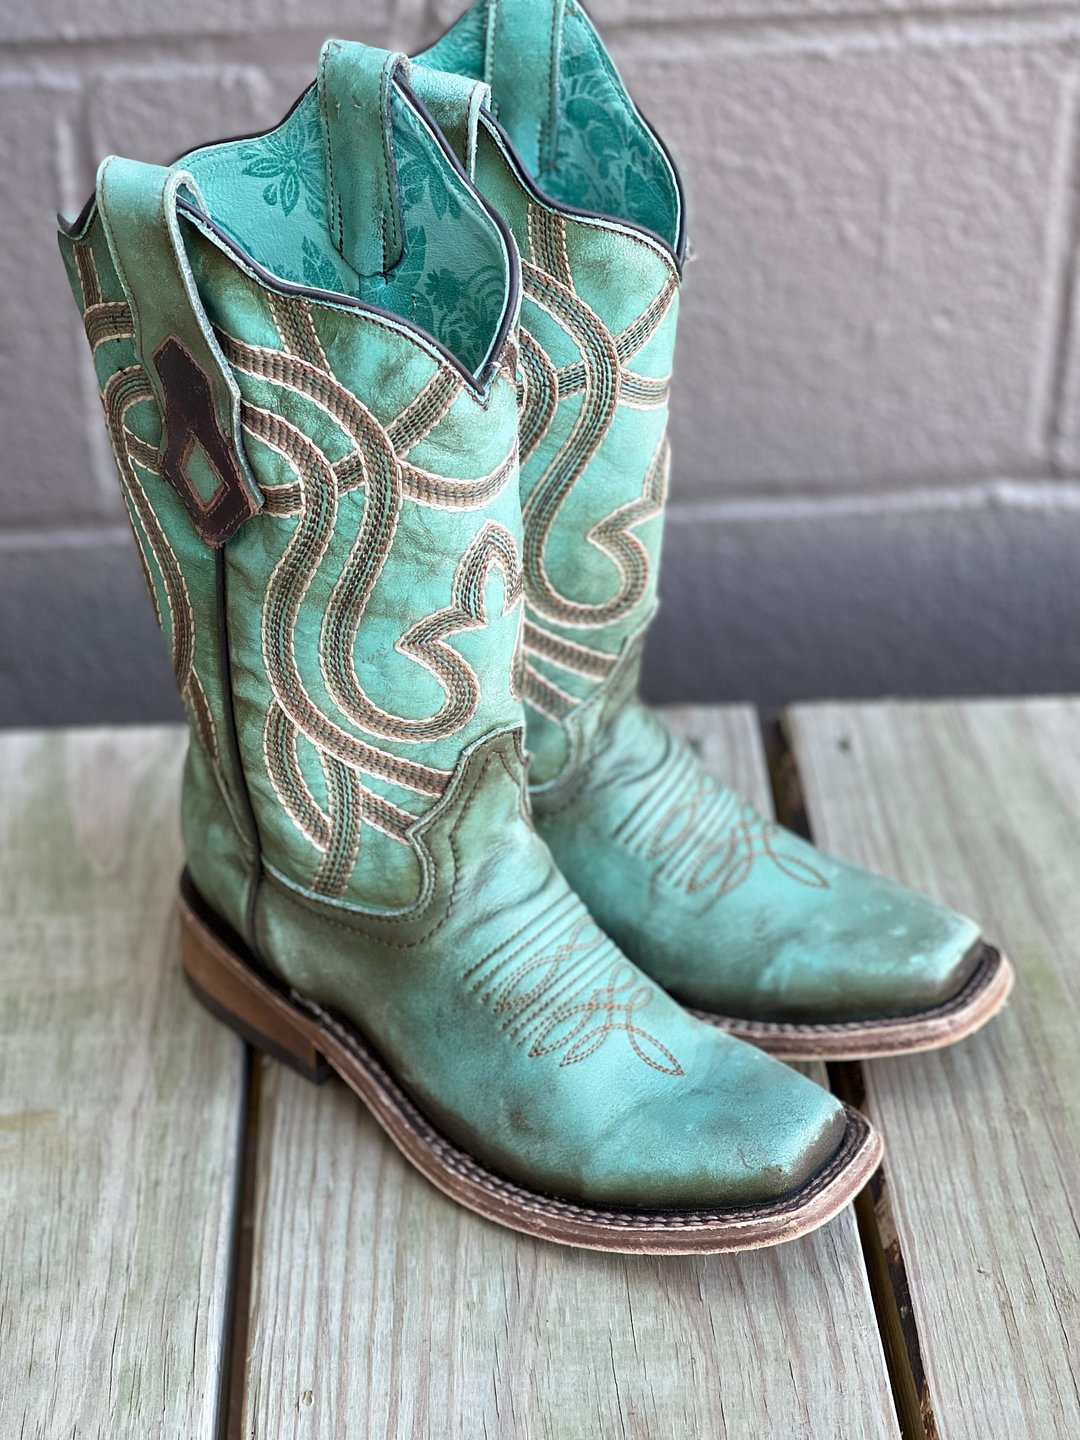 Corral Women's Antique Turquoise Embroidered Square Toe Western Cowgirl Boots C3851